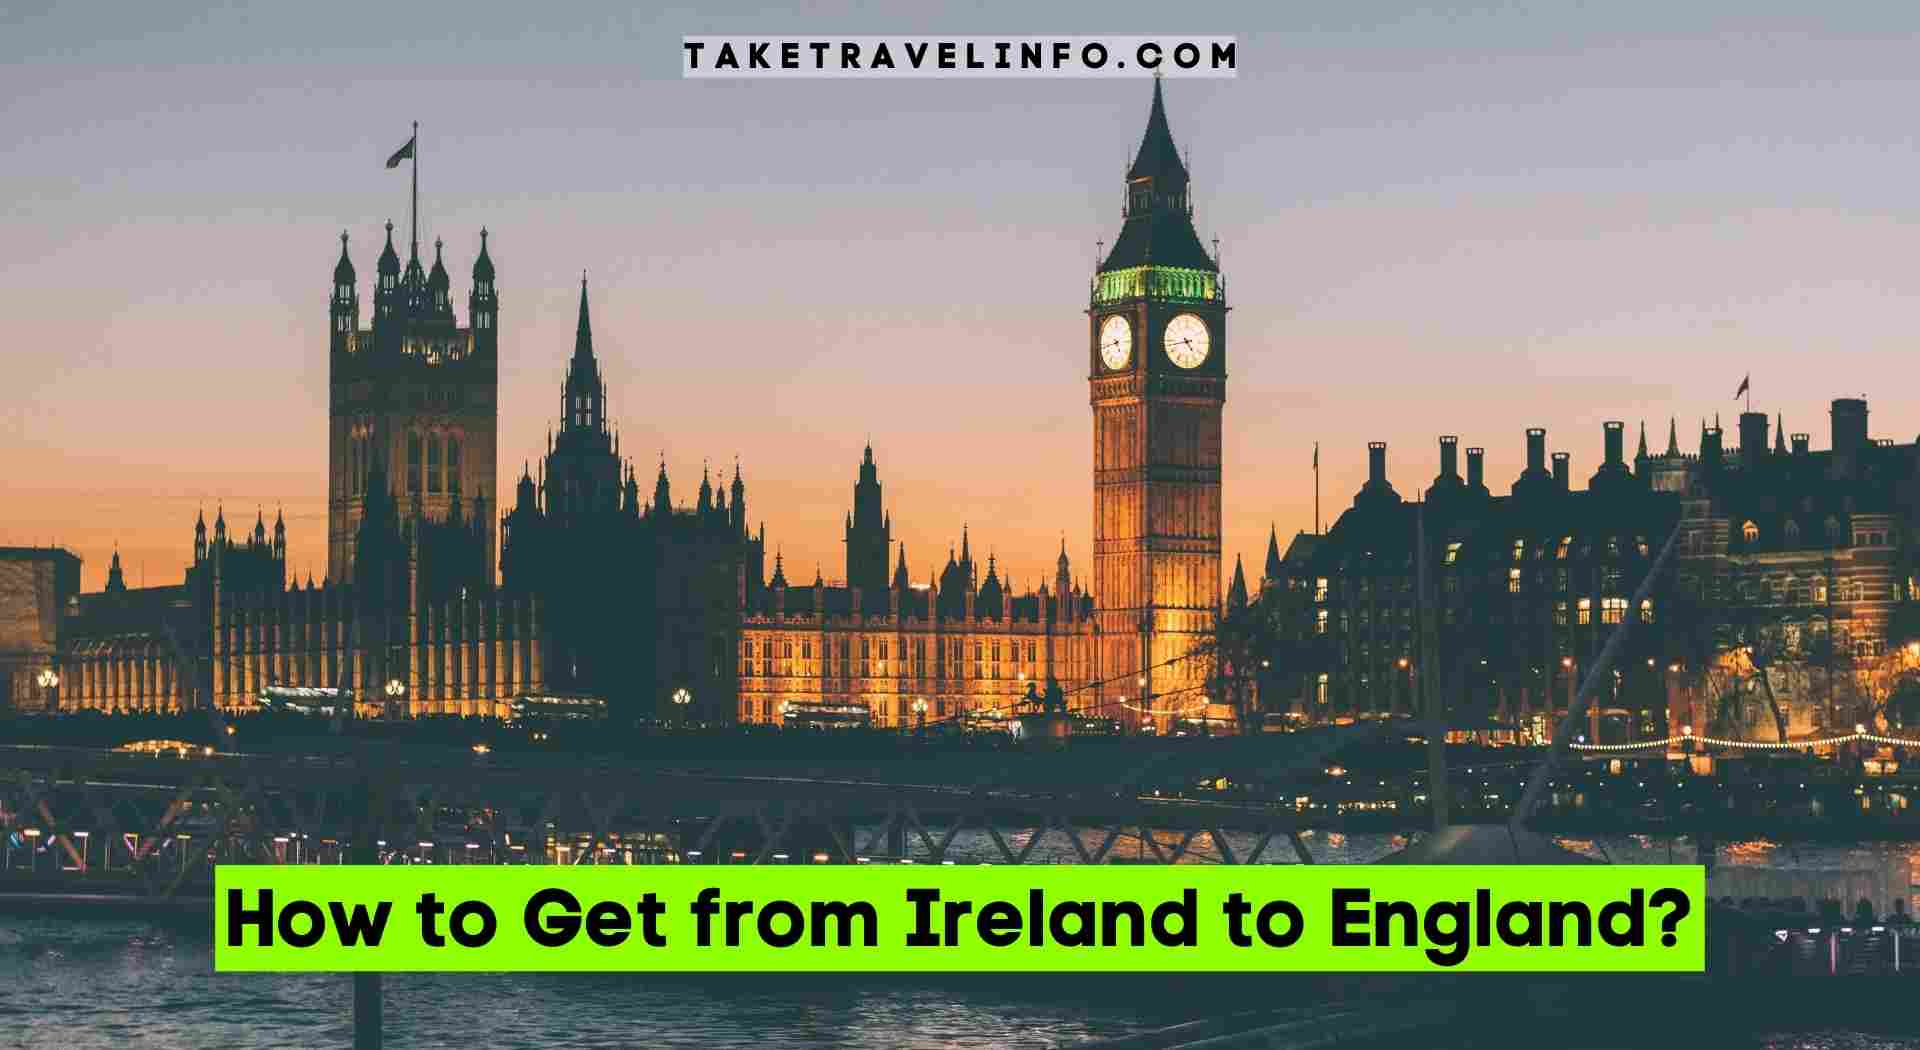 How to Get from Ireland to England?